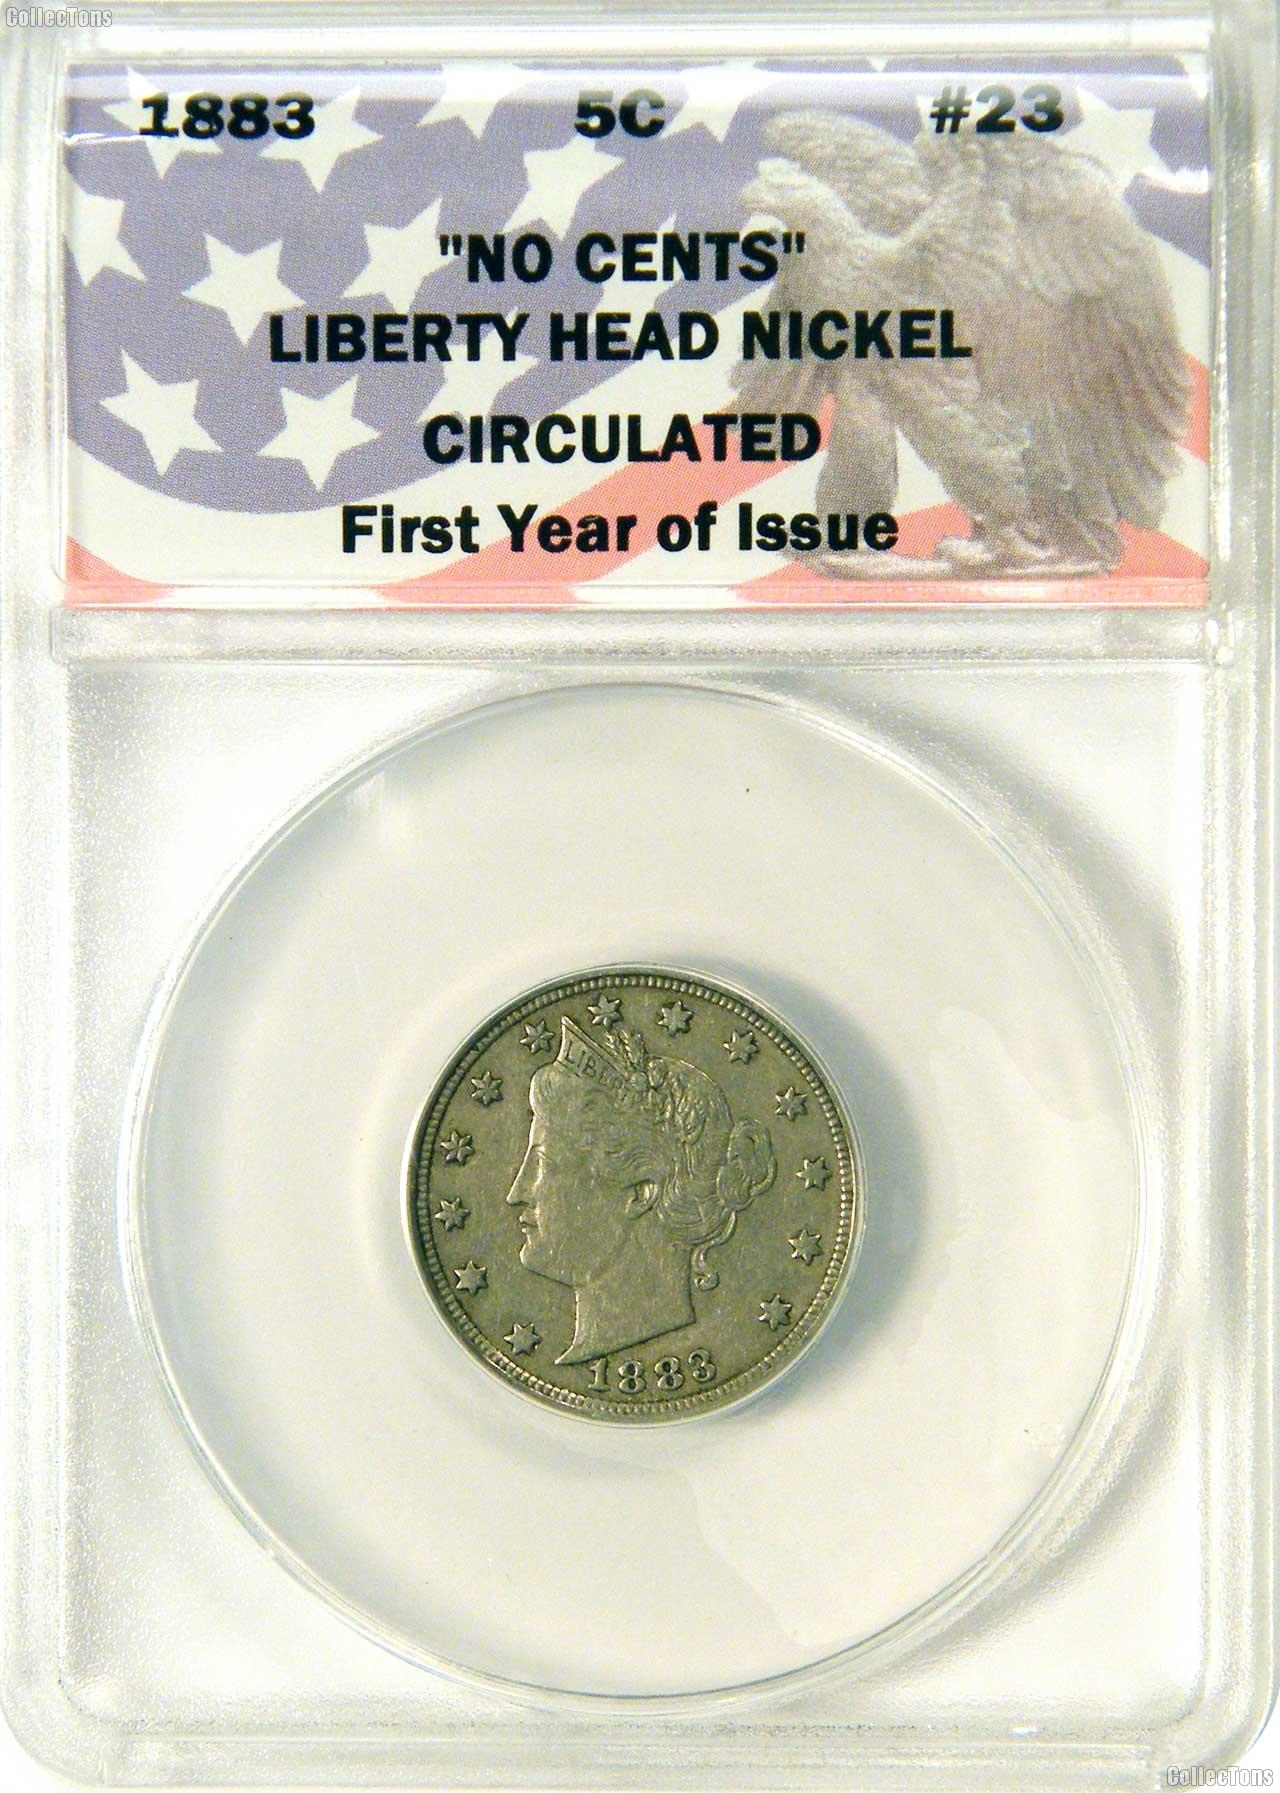 CollecTons Keepers #23: 1883 “NO CENTS” Liberty Head Nickel Certified in Exclusive ANACS Holder